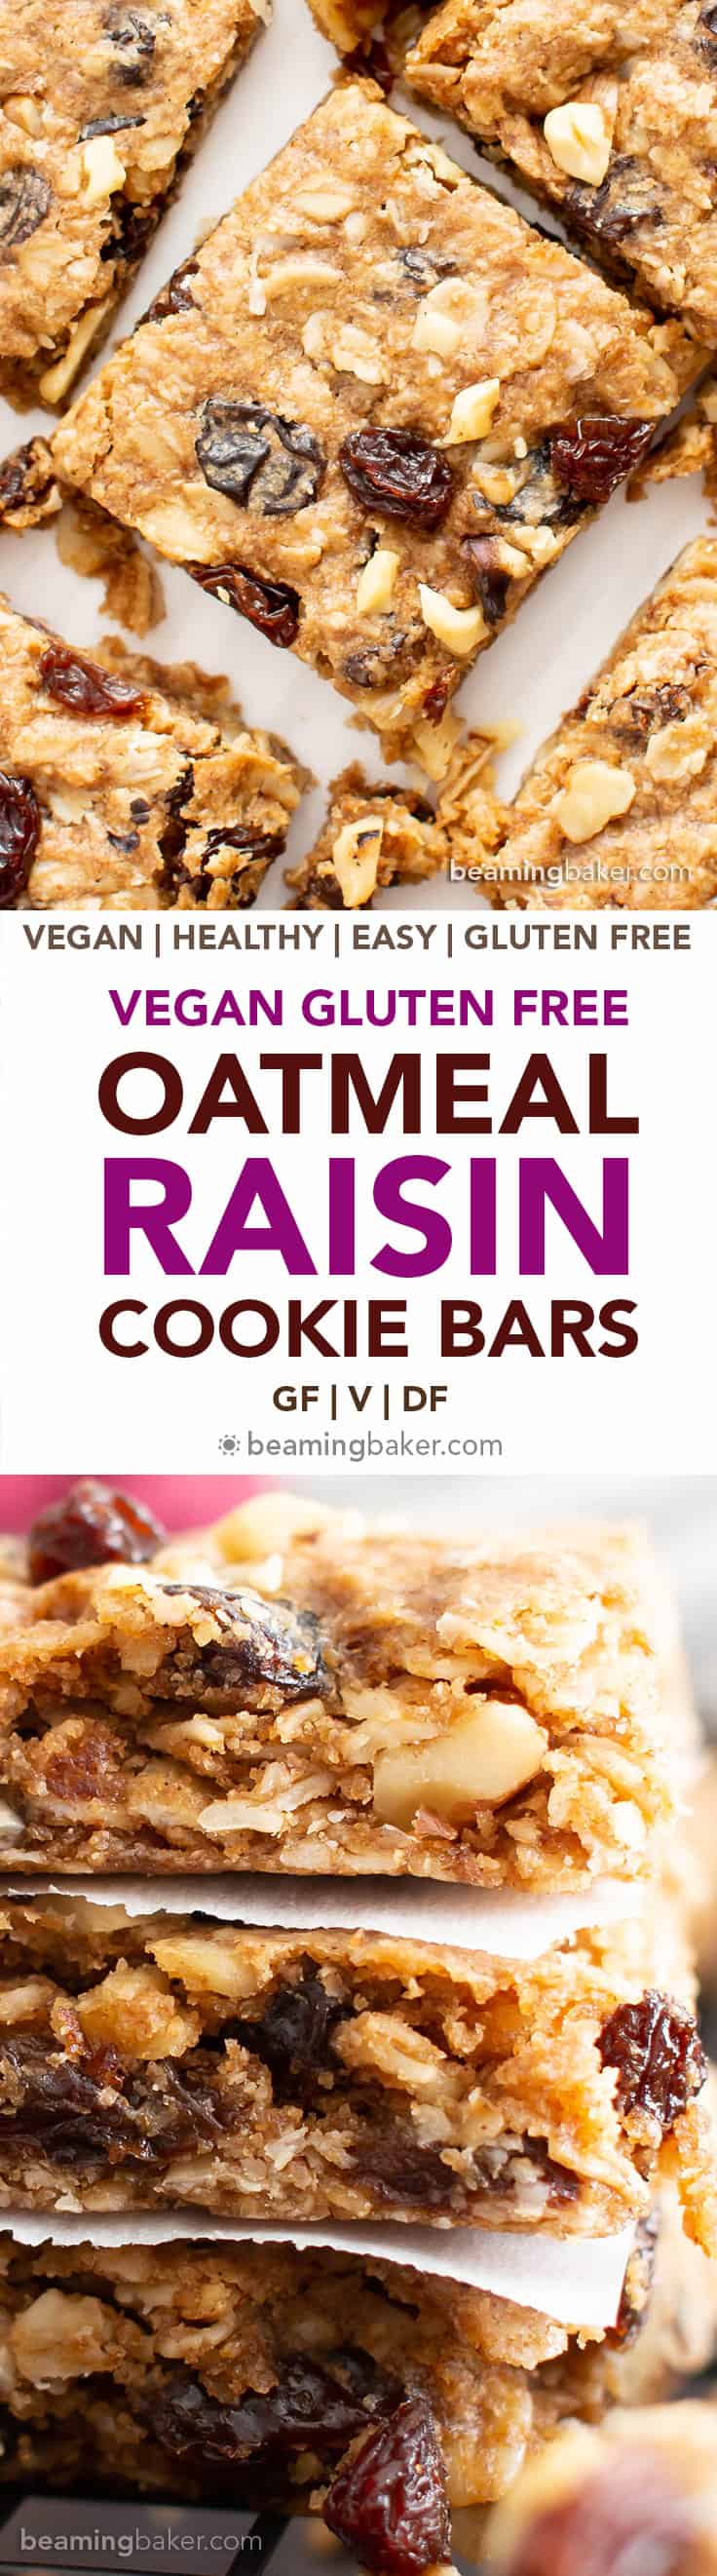 The BEST Vegan Oatmeal Raisin Bars Recipe: chewy centers, crispy edges, packed with raisins & oats! The ultimate gluten free oatmeal cookie bars—healthy, homemade & easy! #Oatmeal #Vegan #GlutenFree #Cookies | Recipe at BeamingBaker.com